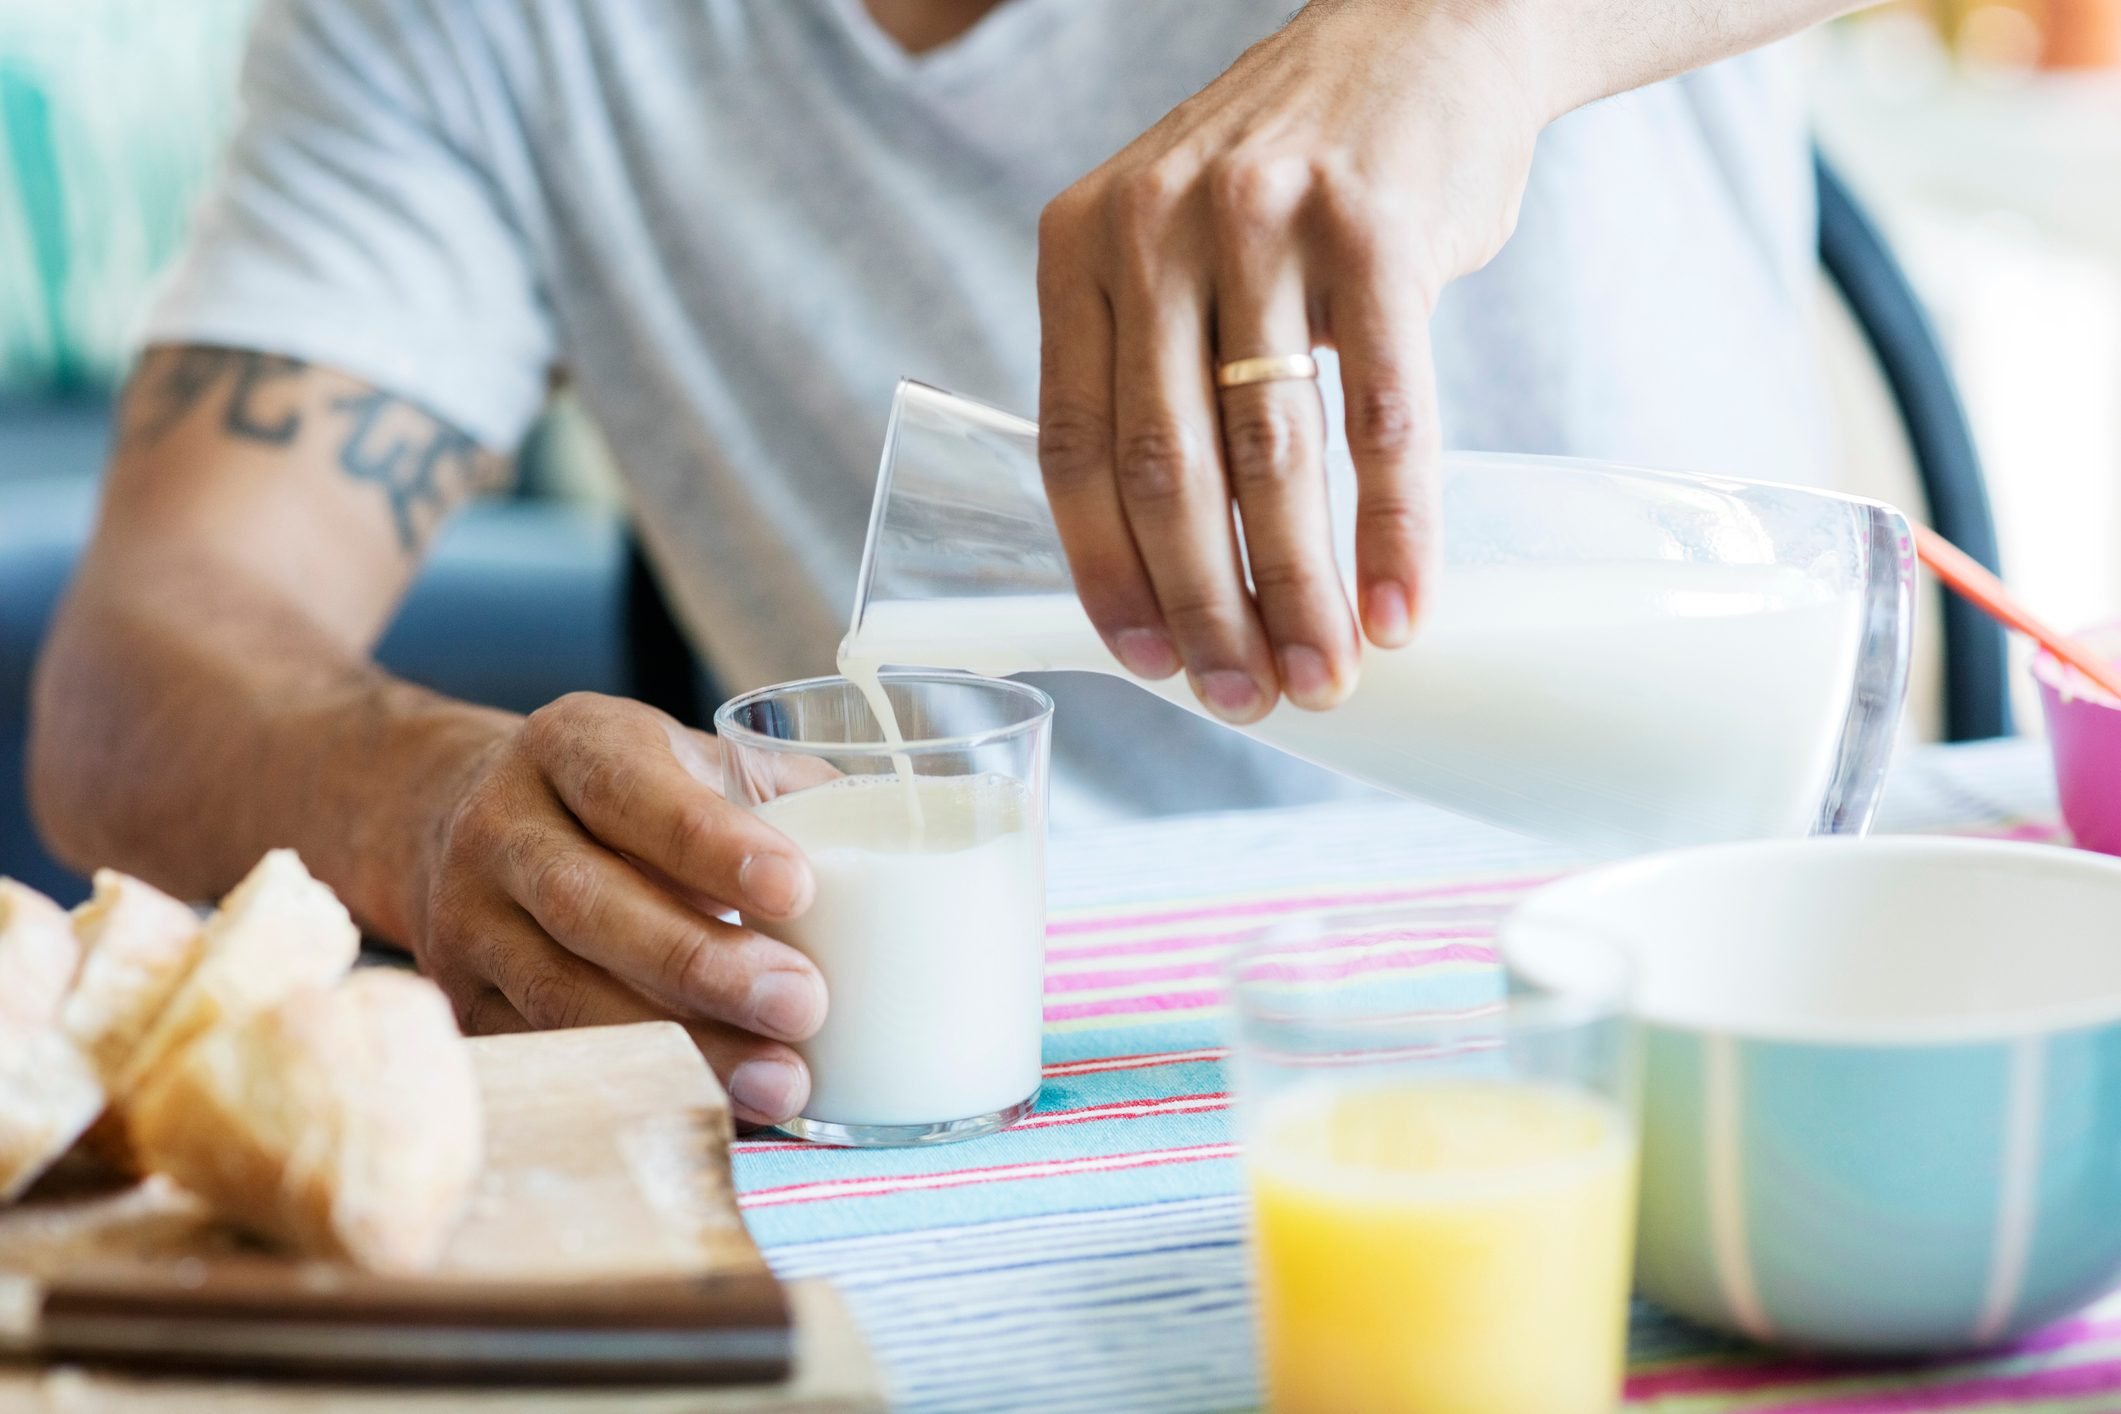 Soy MiIk vs. Almond Milk: How Does Their Nutrition Compare?